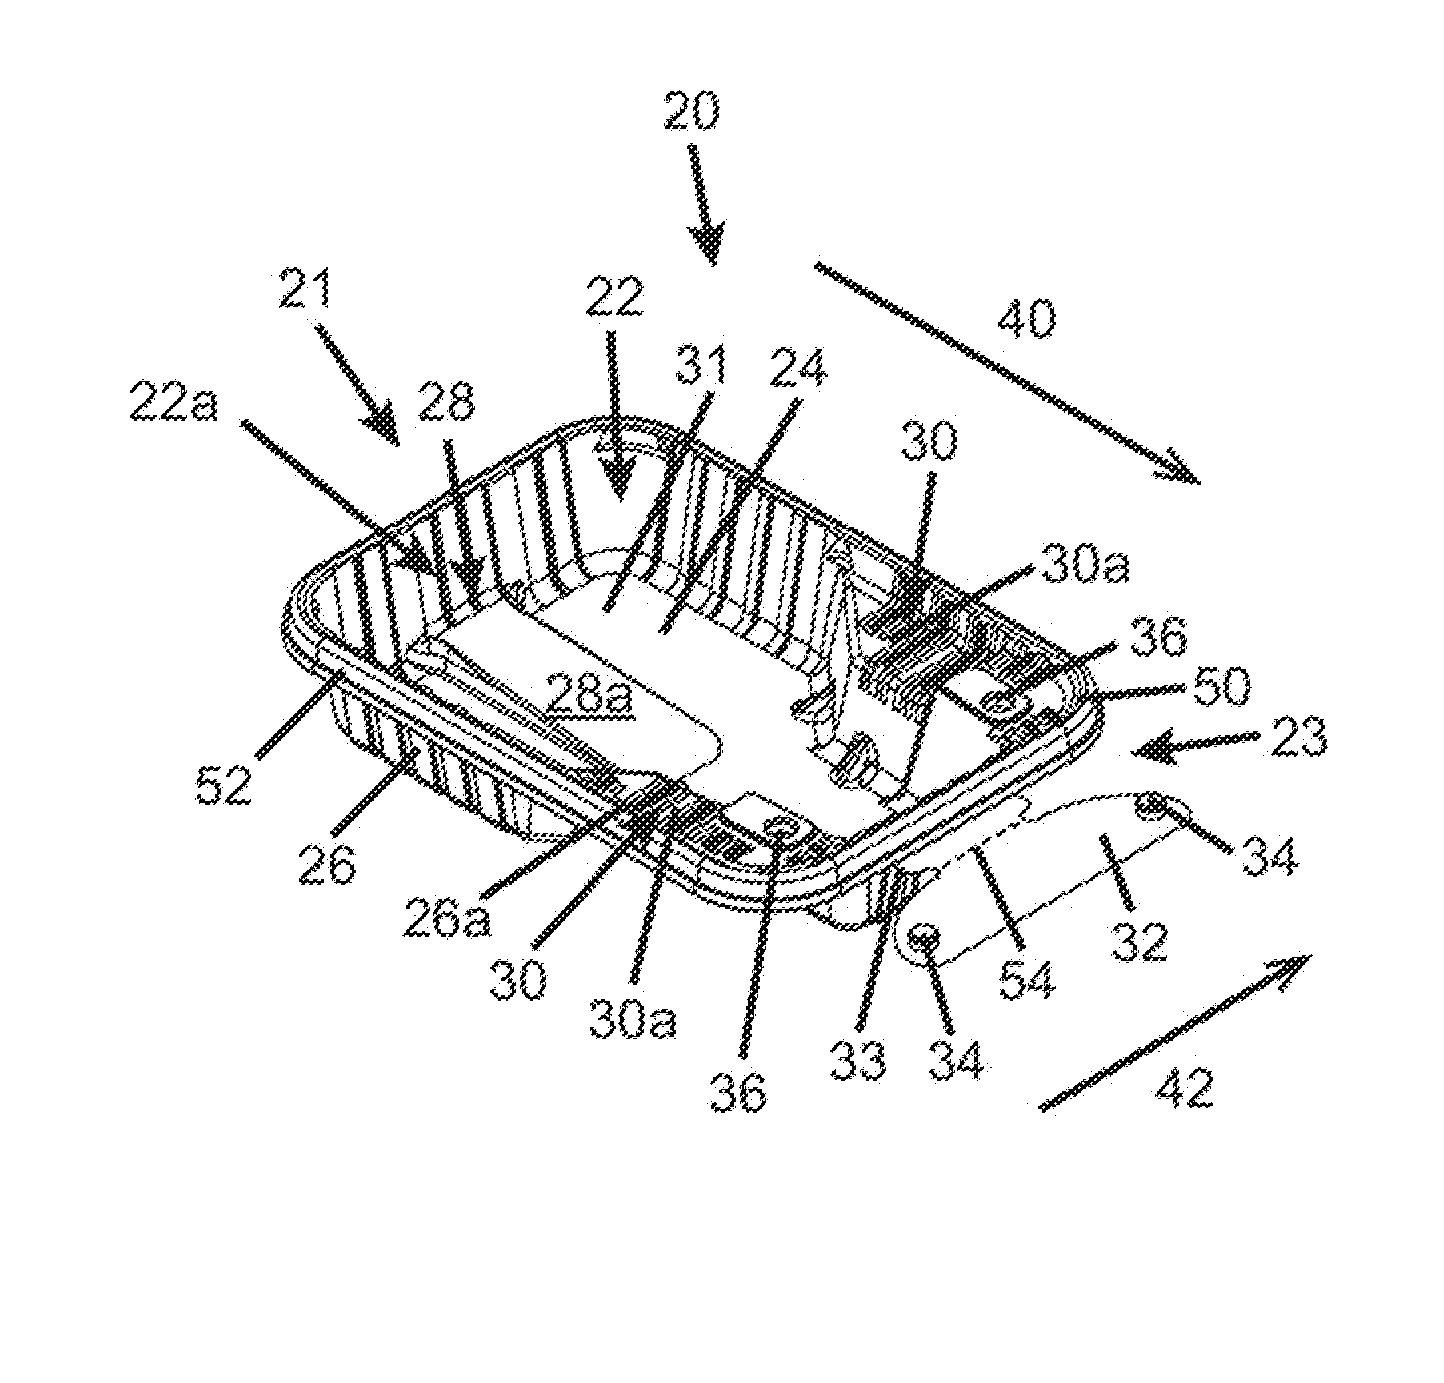 Poultry tray and method of packaging poultry using same